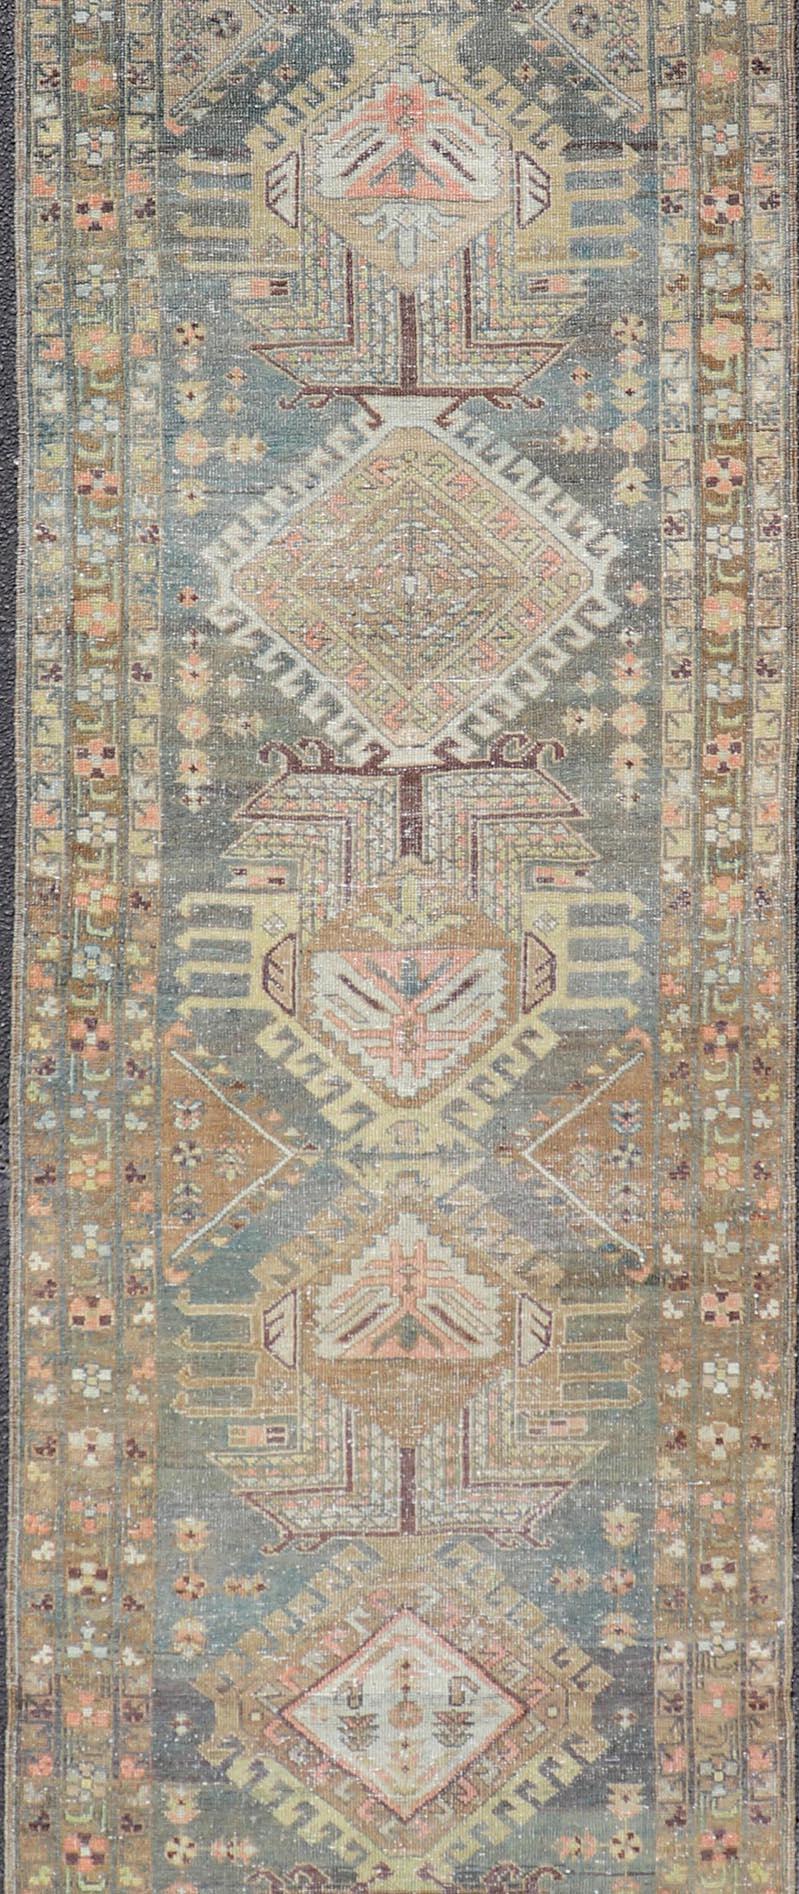 Heriz Antique Persian Rug with Geometric Medallions in Steal Blue, Brown & Peach In Good Condition For Sale In Atlanta, GA